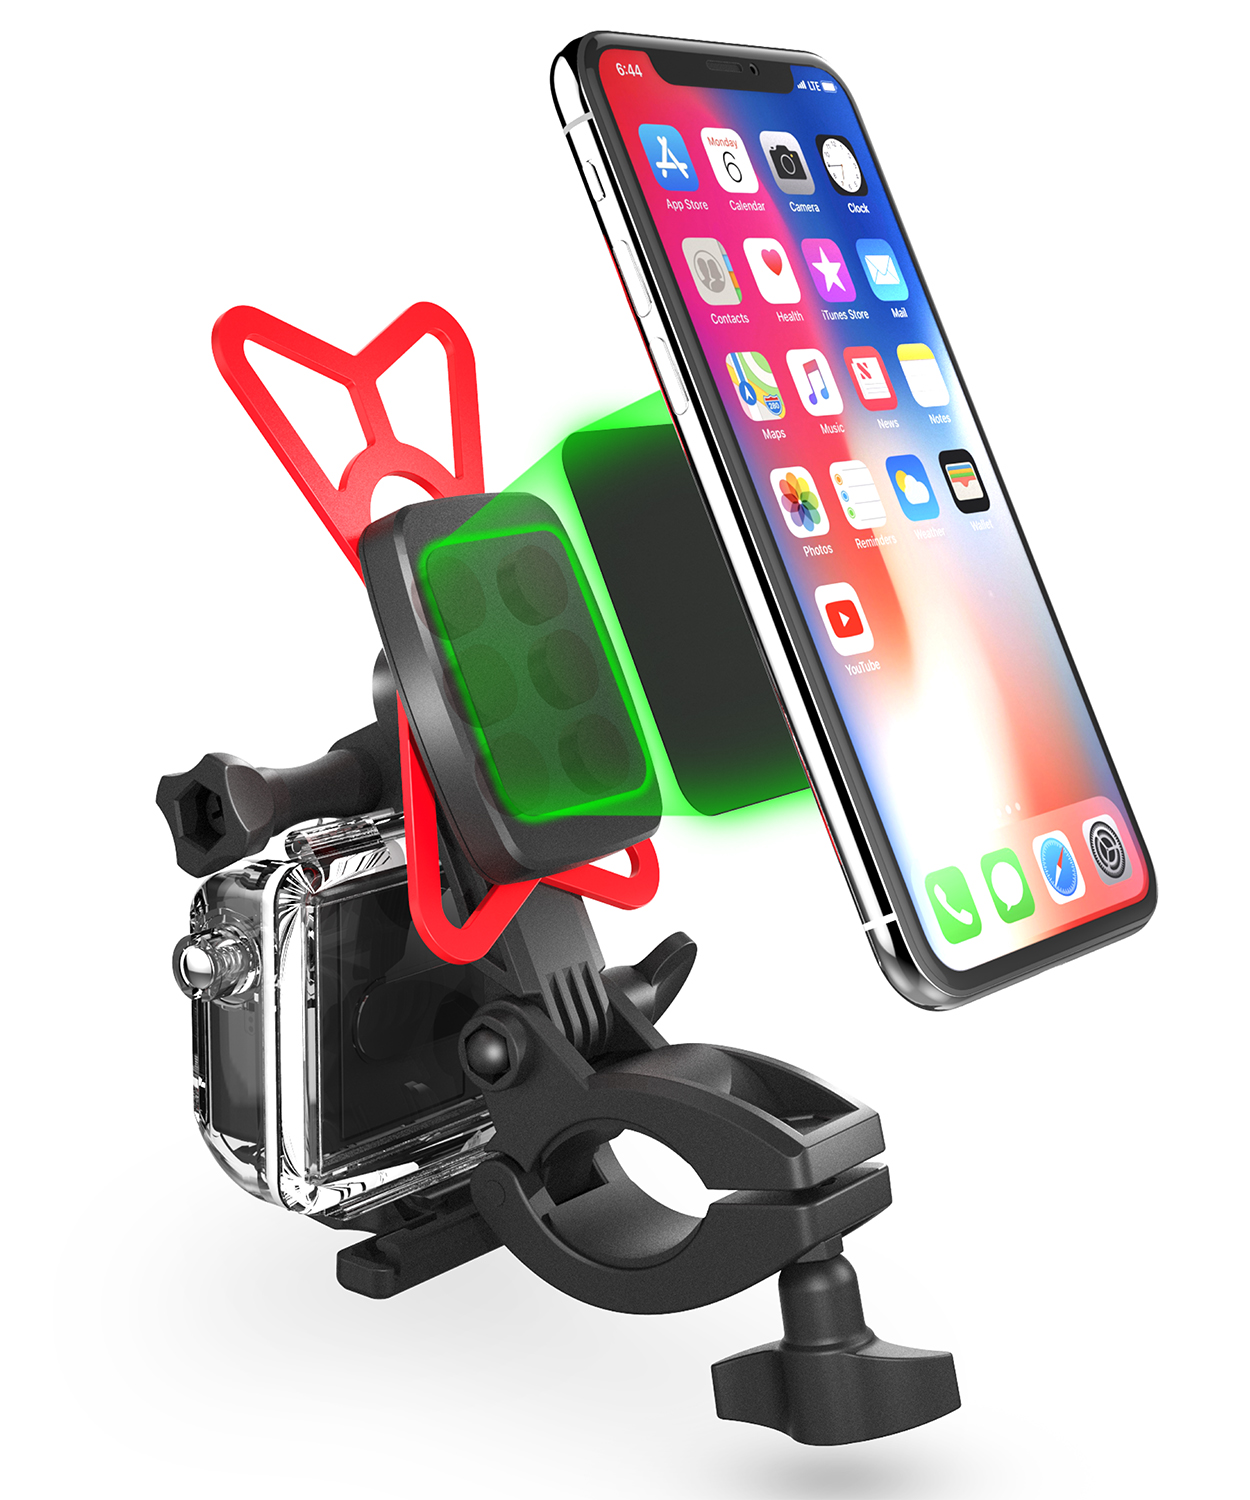 Vena's New Magnetic Bike Smartphone and Action Camera Mount